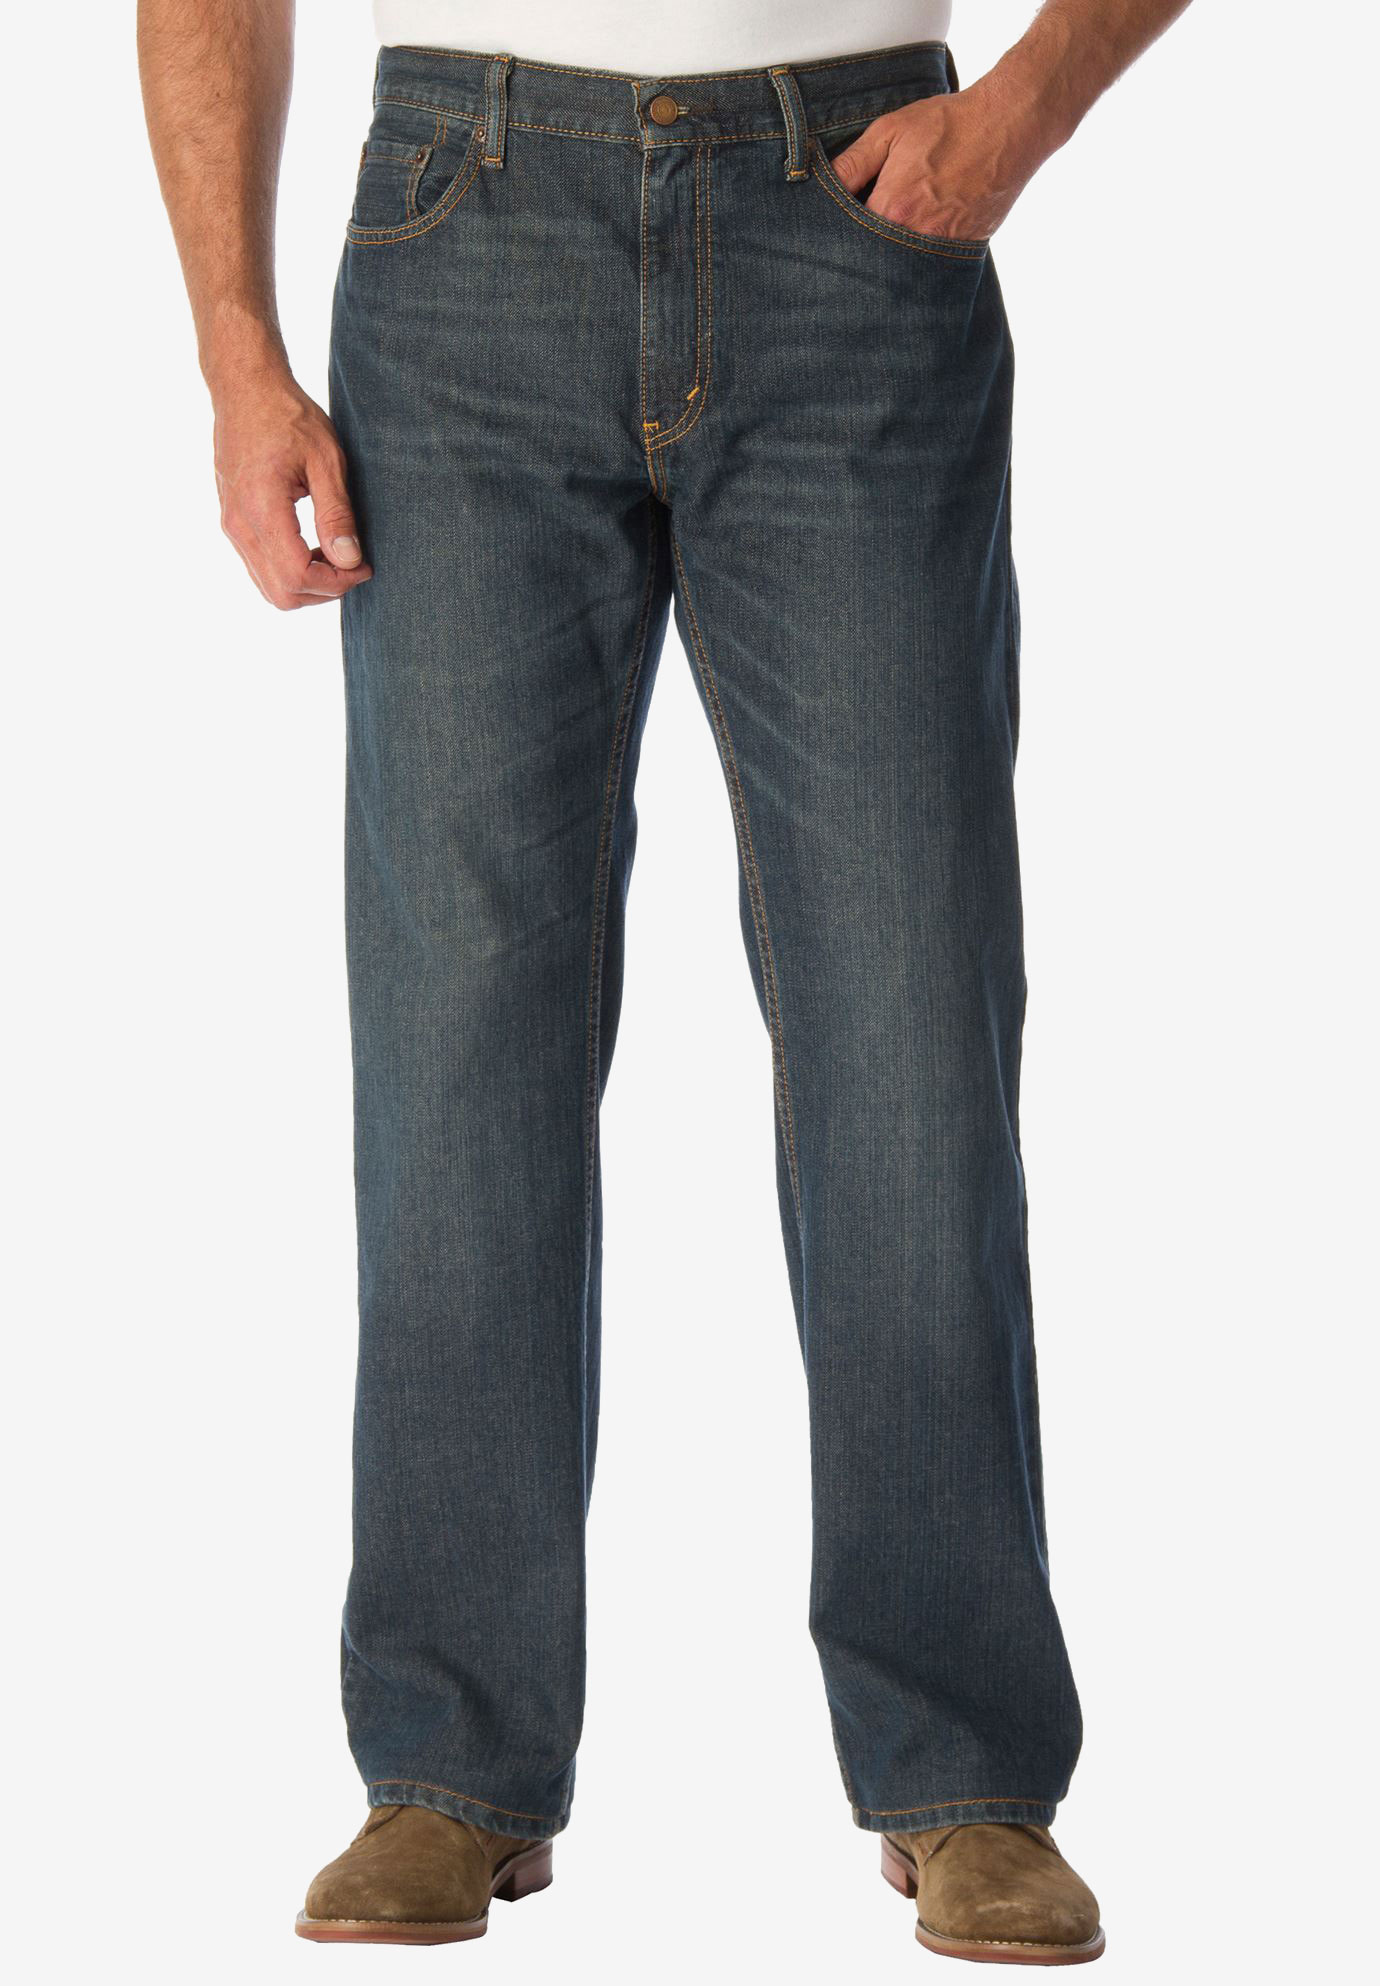 levis thermal jeans